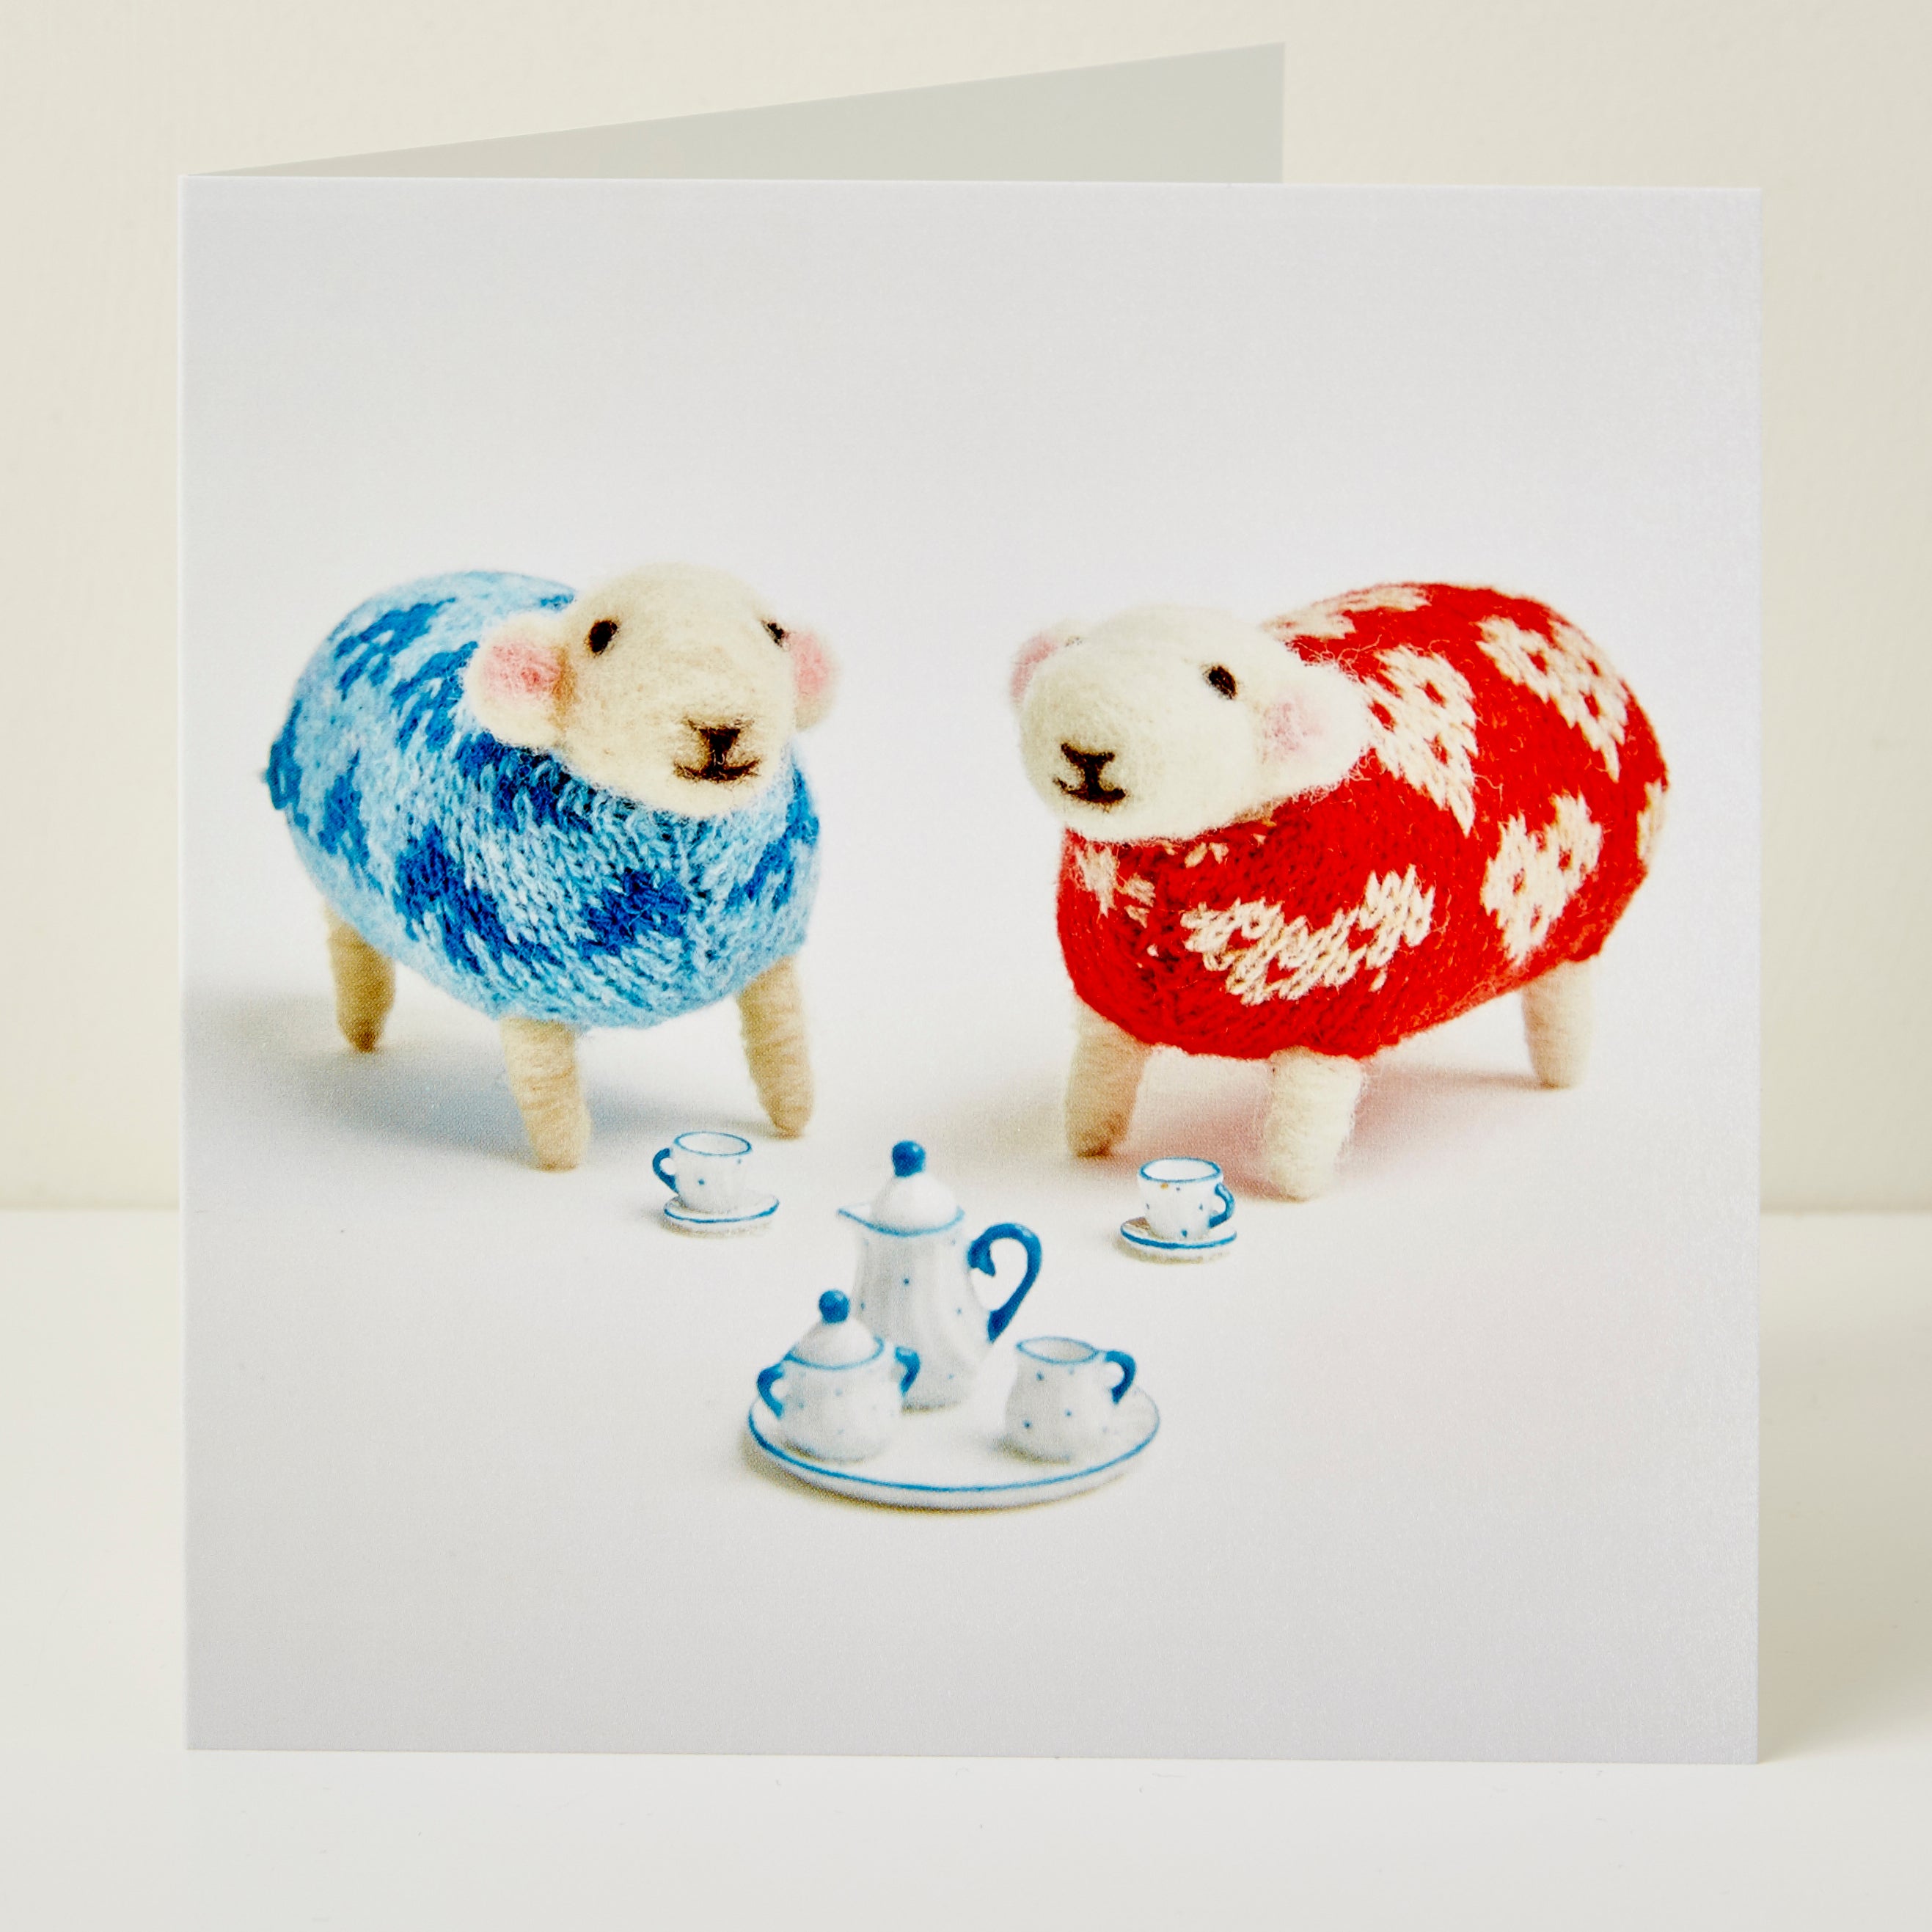 Time for Tea Greeting Card by Mary Kilvert